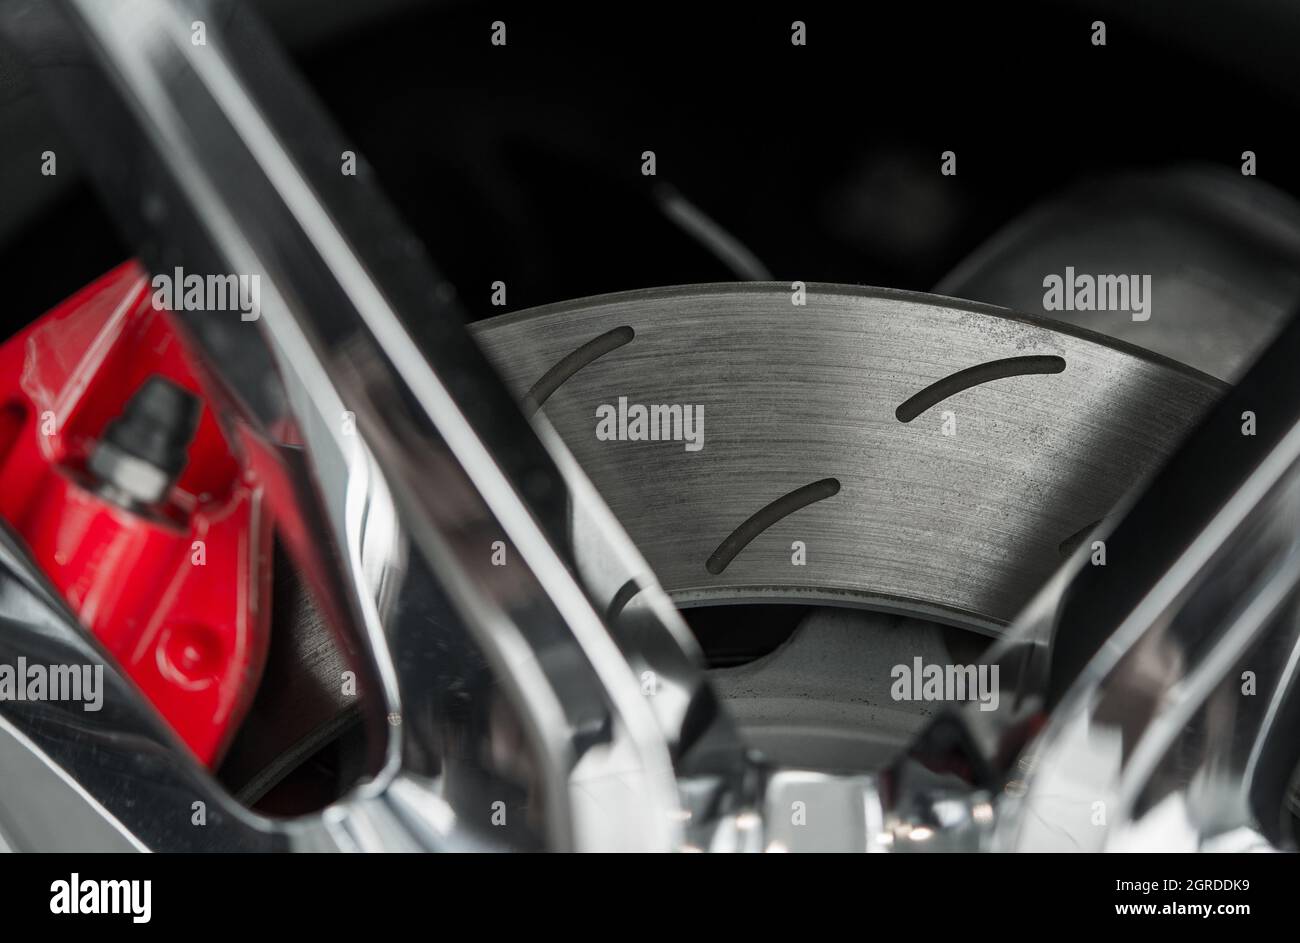 Automotive Industry Theme. Modern Car Brake Disc With Red Caliper Close Up Photo. Stock Photo